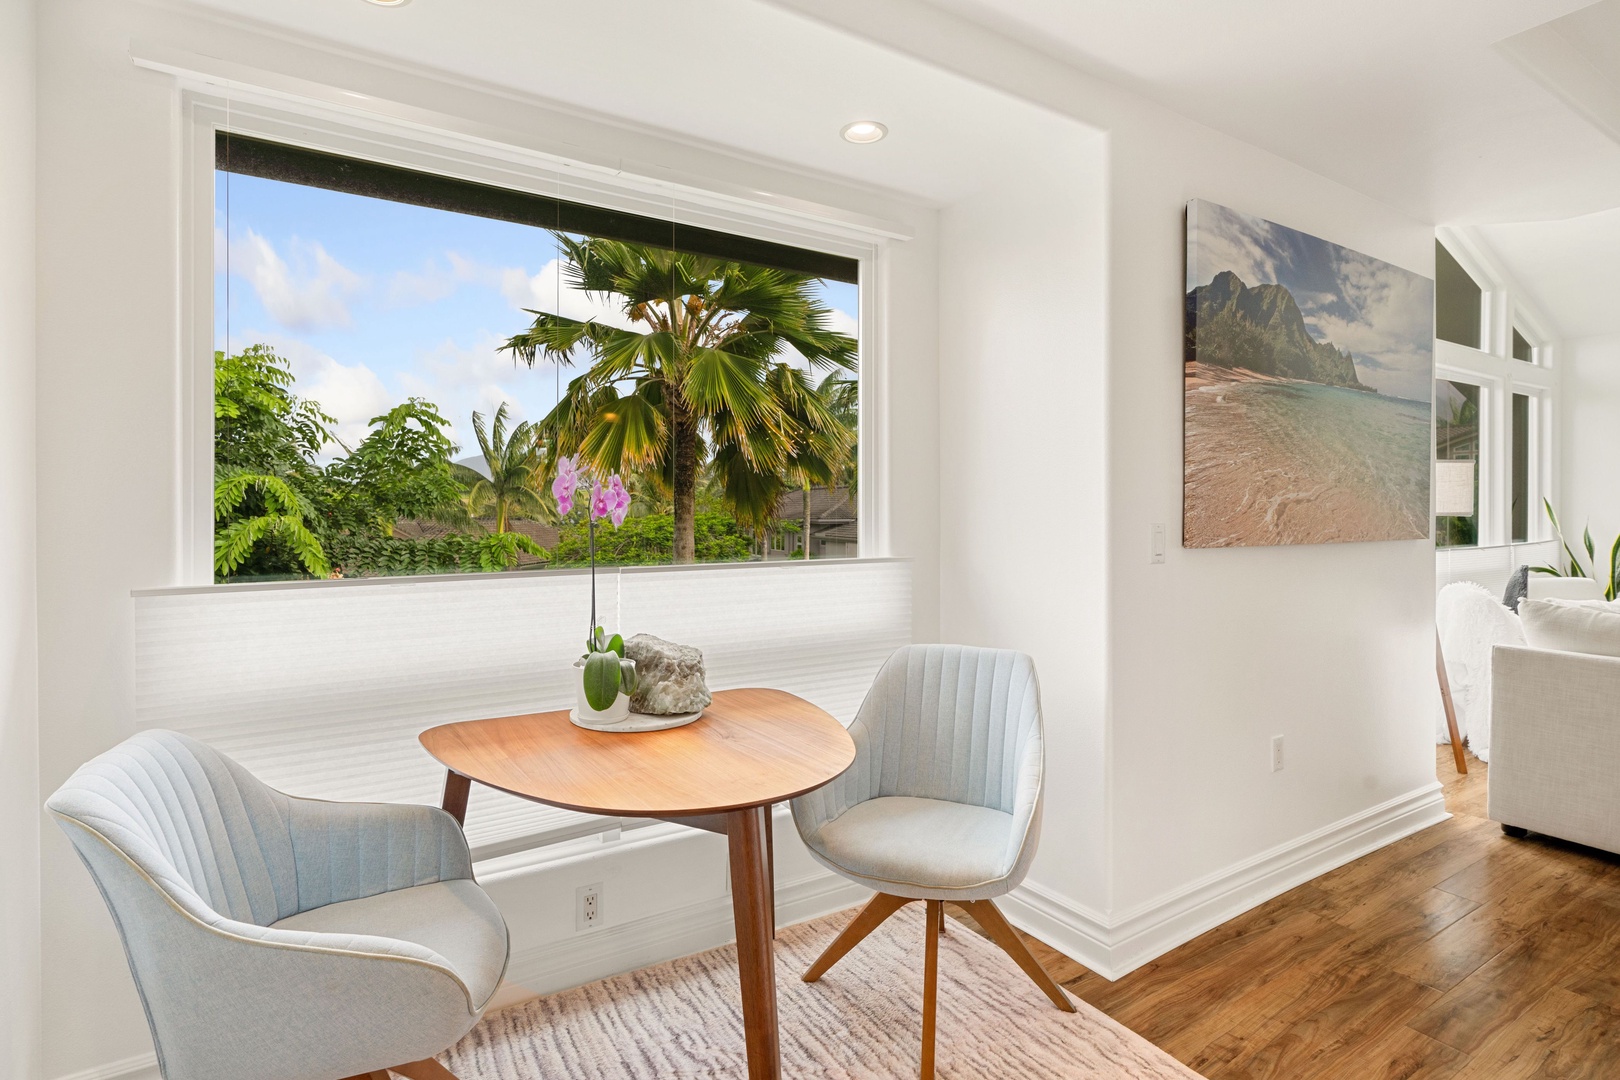 Princeville Vacation Rentals, Tropical Elegance - A serene corner of the primary suite boasts a minimalist wooden round table paired with a pastel blue upholstered chair, a perfect spot for your morning coffee w/ frames a picturesque view of lush palm trees.